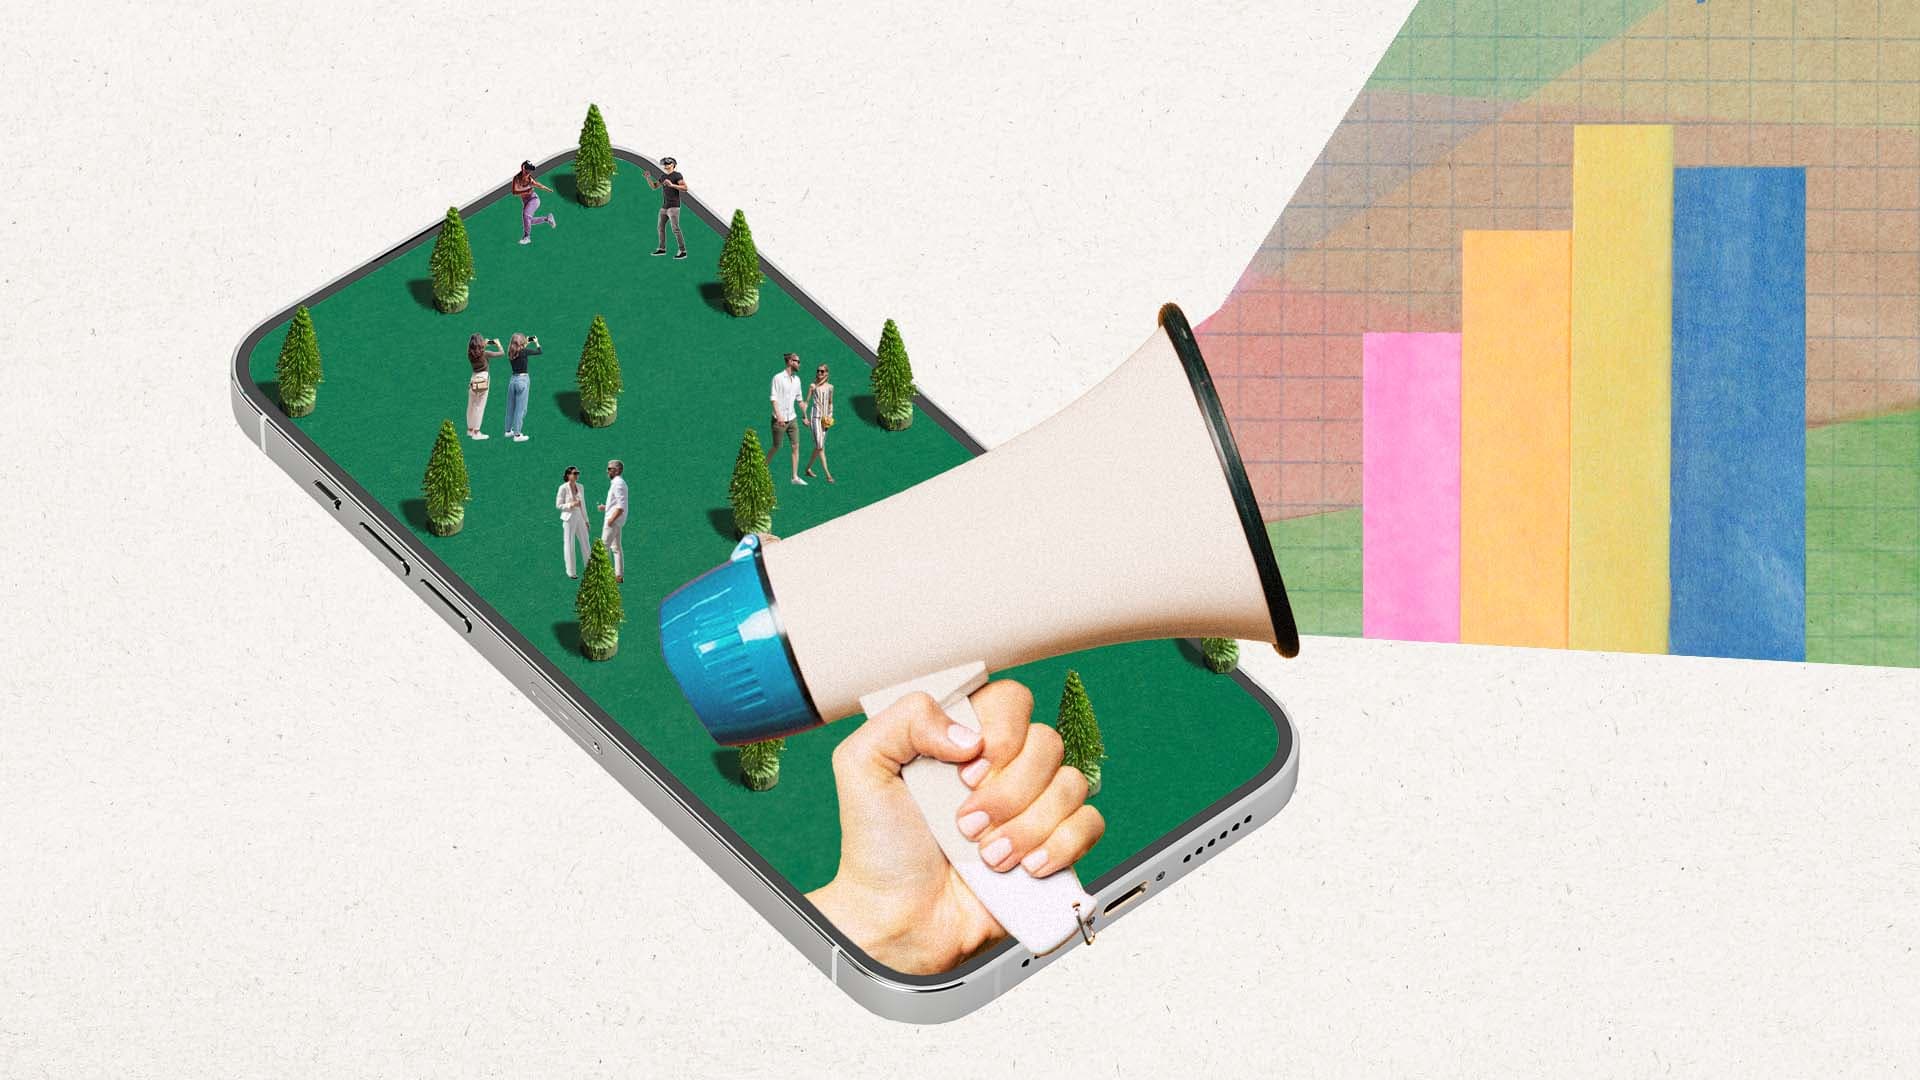 Collage image of a phone screen displaying a diorama of a miniature park, including people and trees, along with a bullhorn projecting a bar graph.